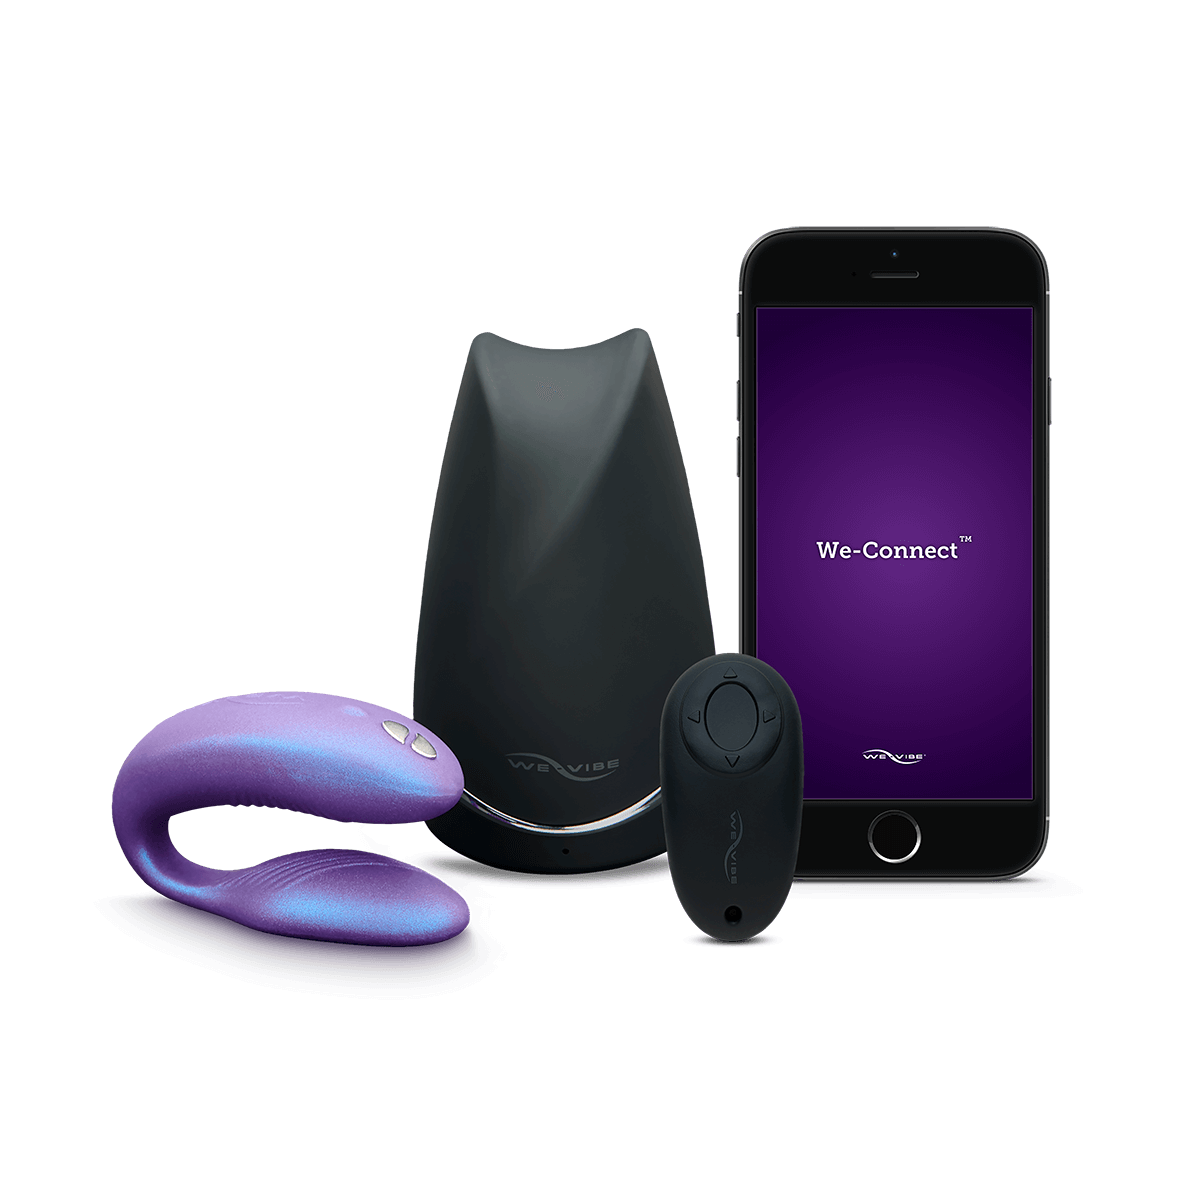 The WE-Vibe Sync Under the Stars